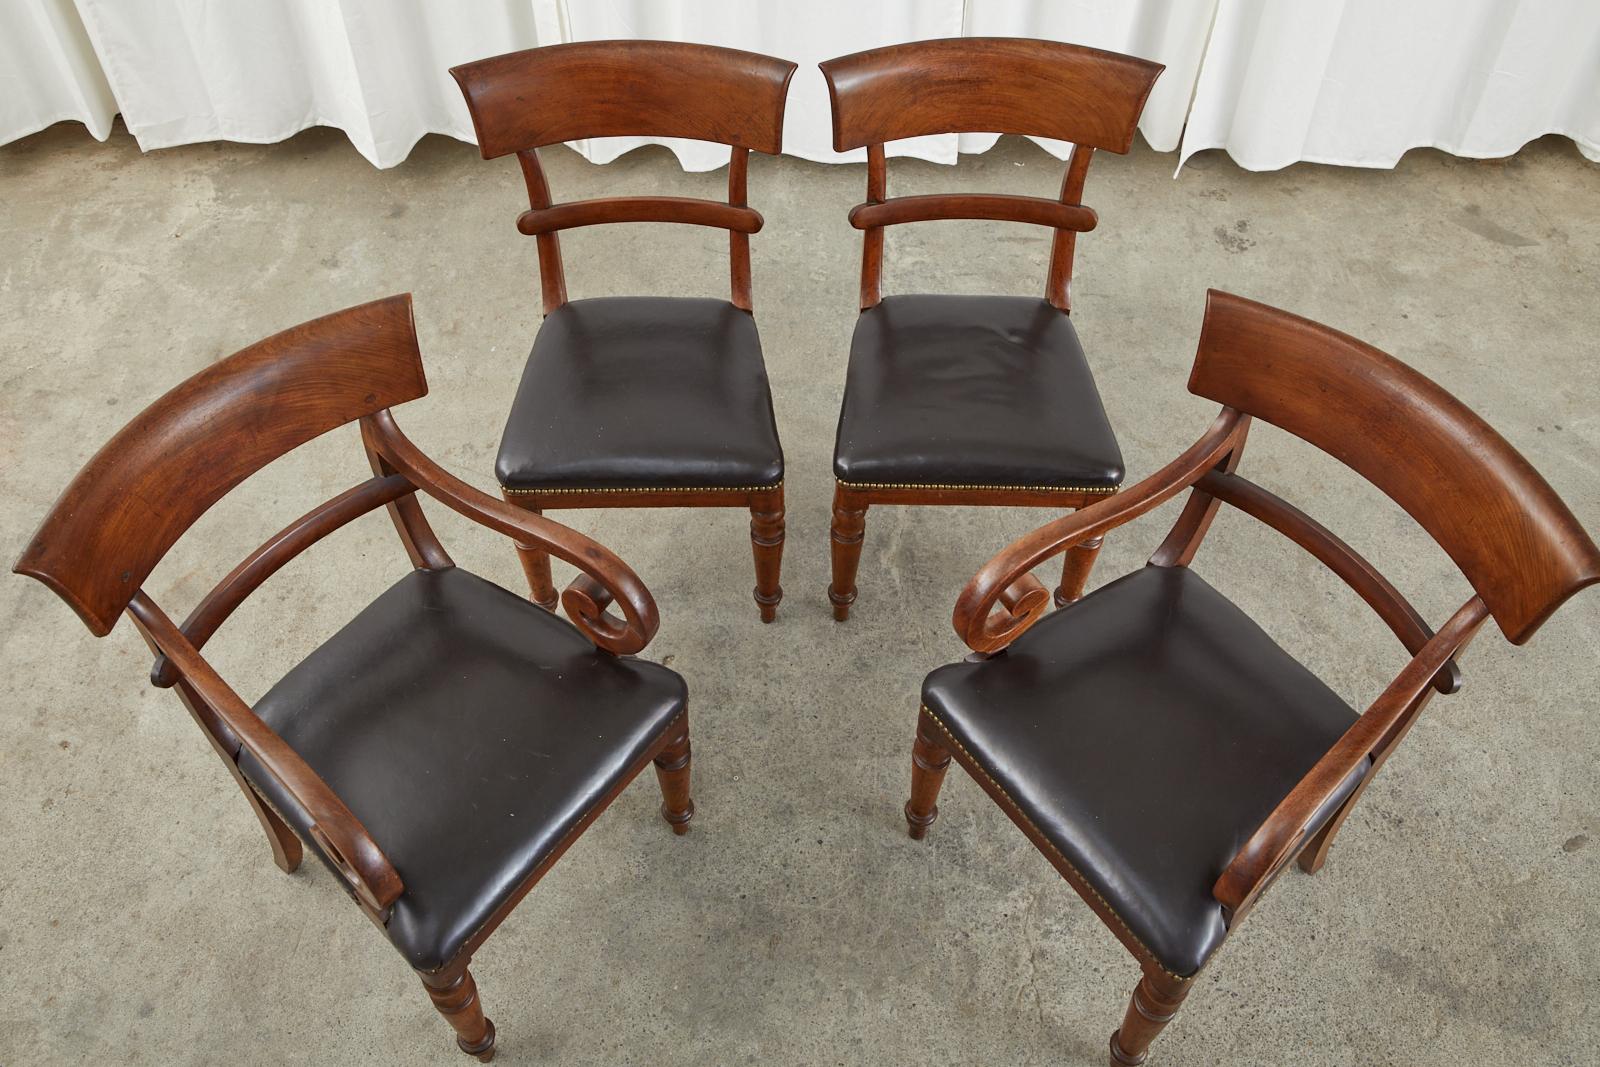 Hand-Crafted Set of Four English Regency Mahogany Dining Chairs